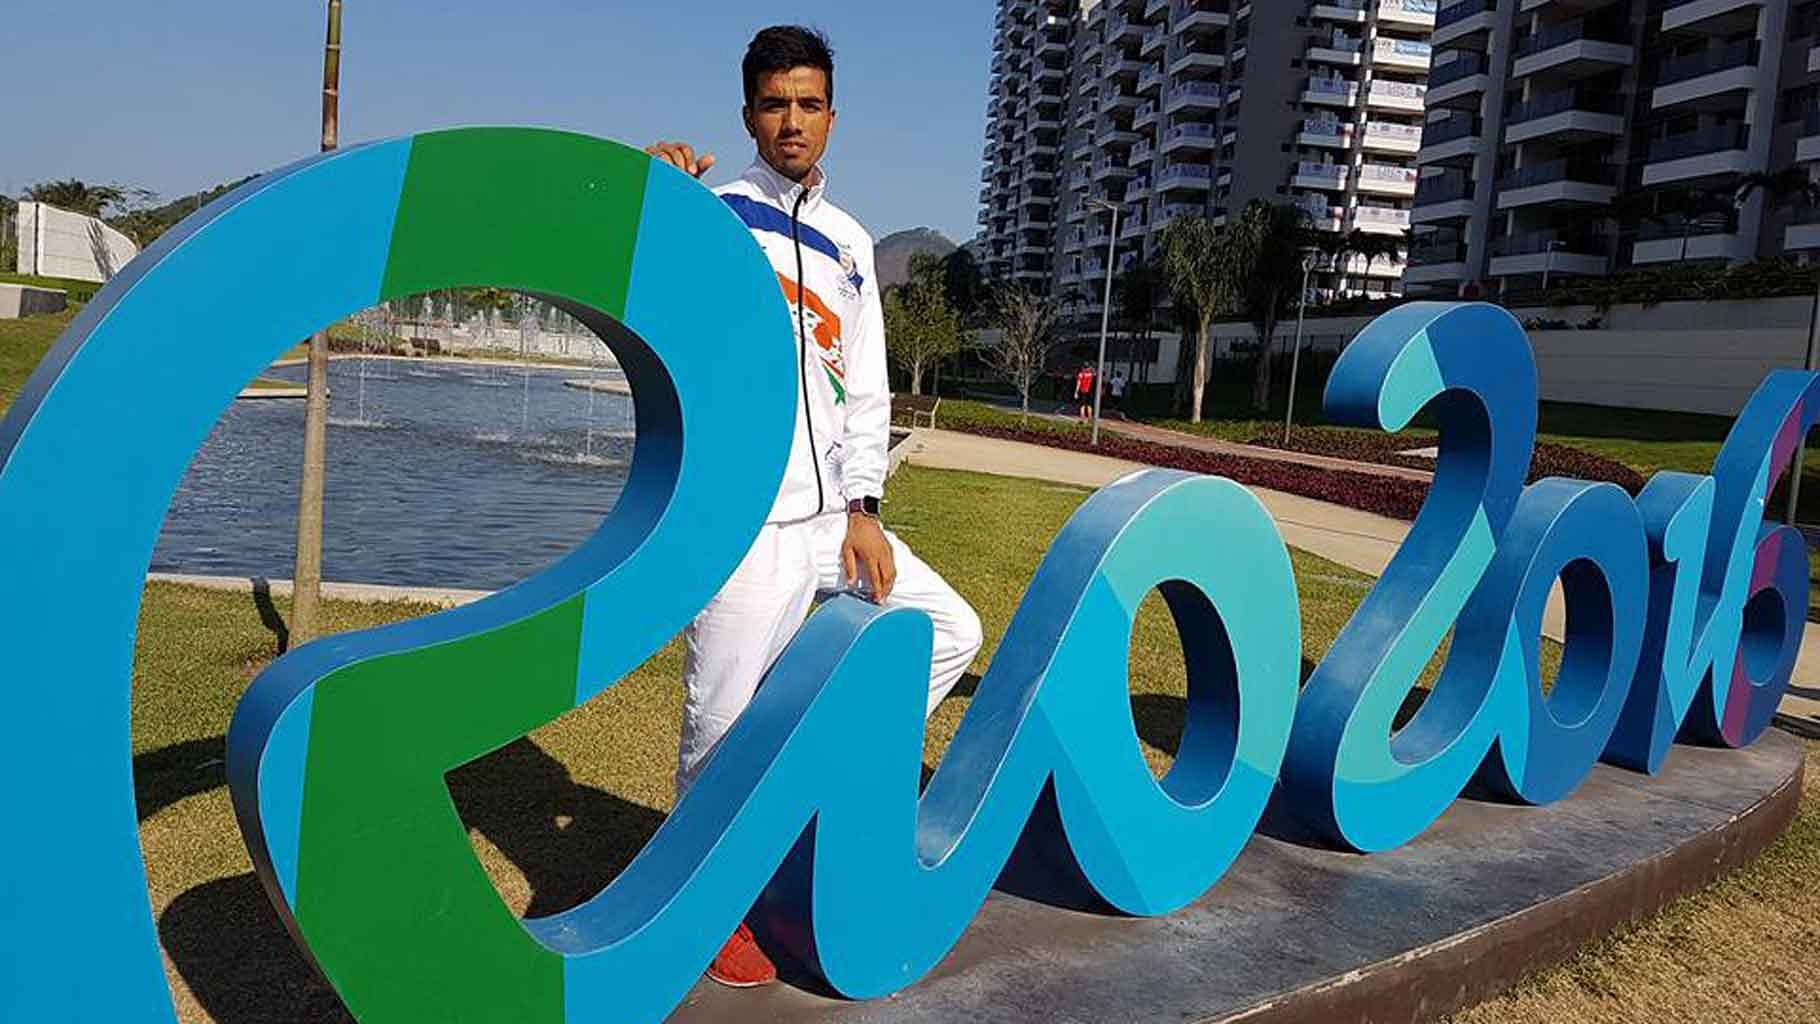 India’s Manish Singh Rawat finished 13th in the Rio finals of the men’s 20km walk event with a timing of 1:21:21. (Photo Courtesy: <a href="https://www.facebook.com/846568555456904/photos/pcb.1021832804597144/1021832754597149/?type=3&amp;theater">Facebook/Manish Singh Rawat</a>)